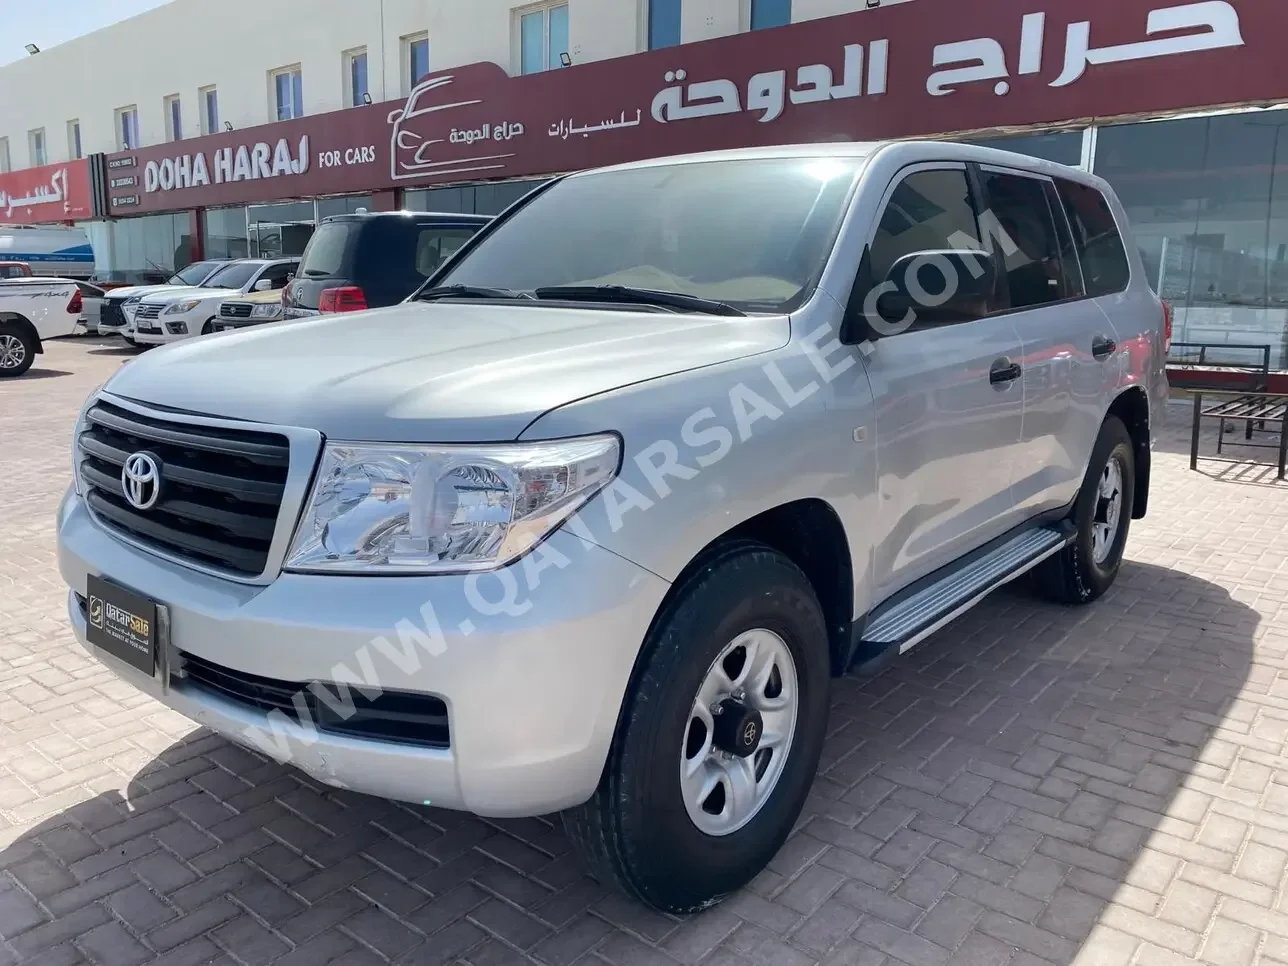 Toyota  Land Cruiser  G  2010  Automatic  345,000 Km  6 Cylinder  Four Wheel Drive (4WD)  SUV  Silver